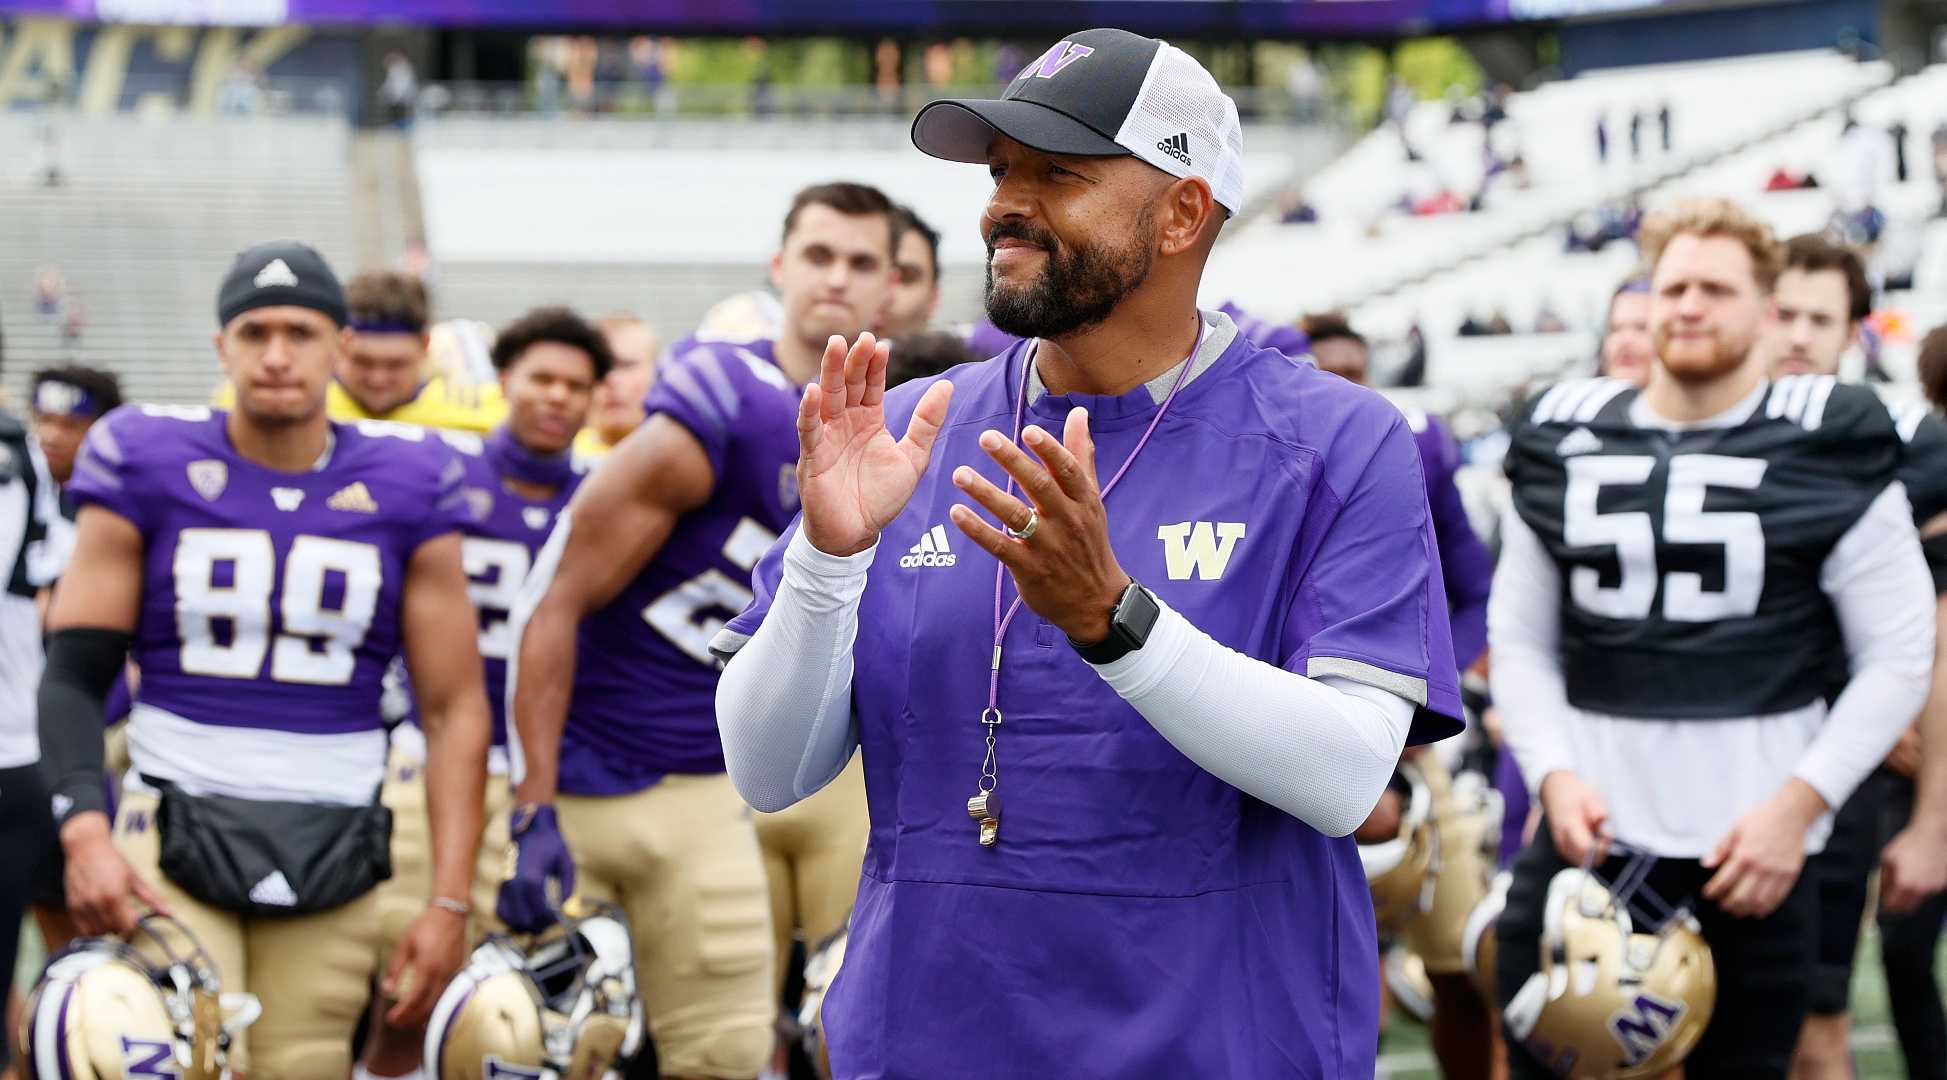 Head coach Jimmy Lake of the Washington Huskies gathers with his players after the spring game at Husky Stadium on May 01, 2021 in Seattle, Washington. (Photo by Steph Chambers/Getty Images)